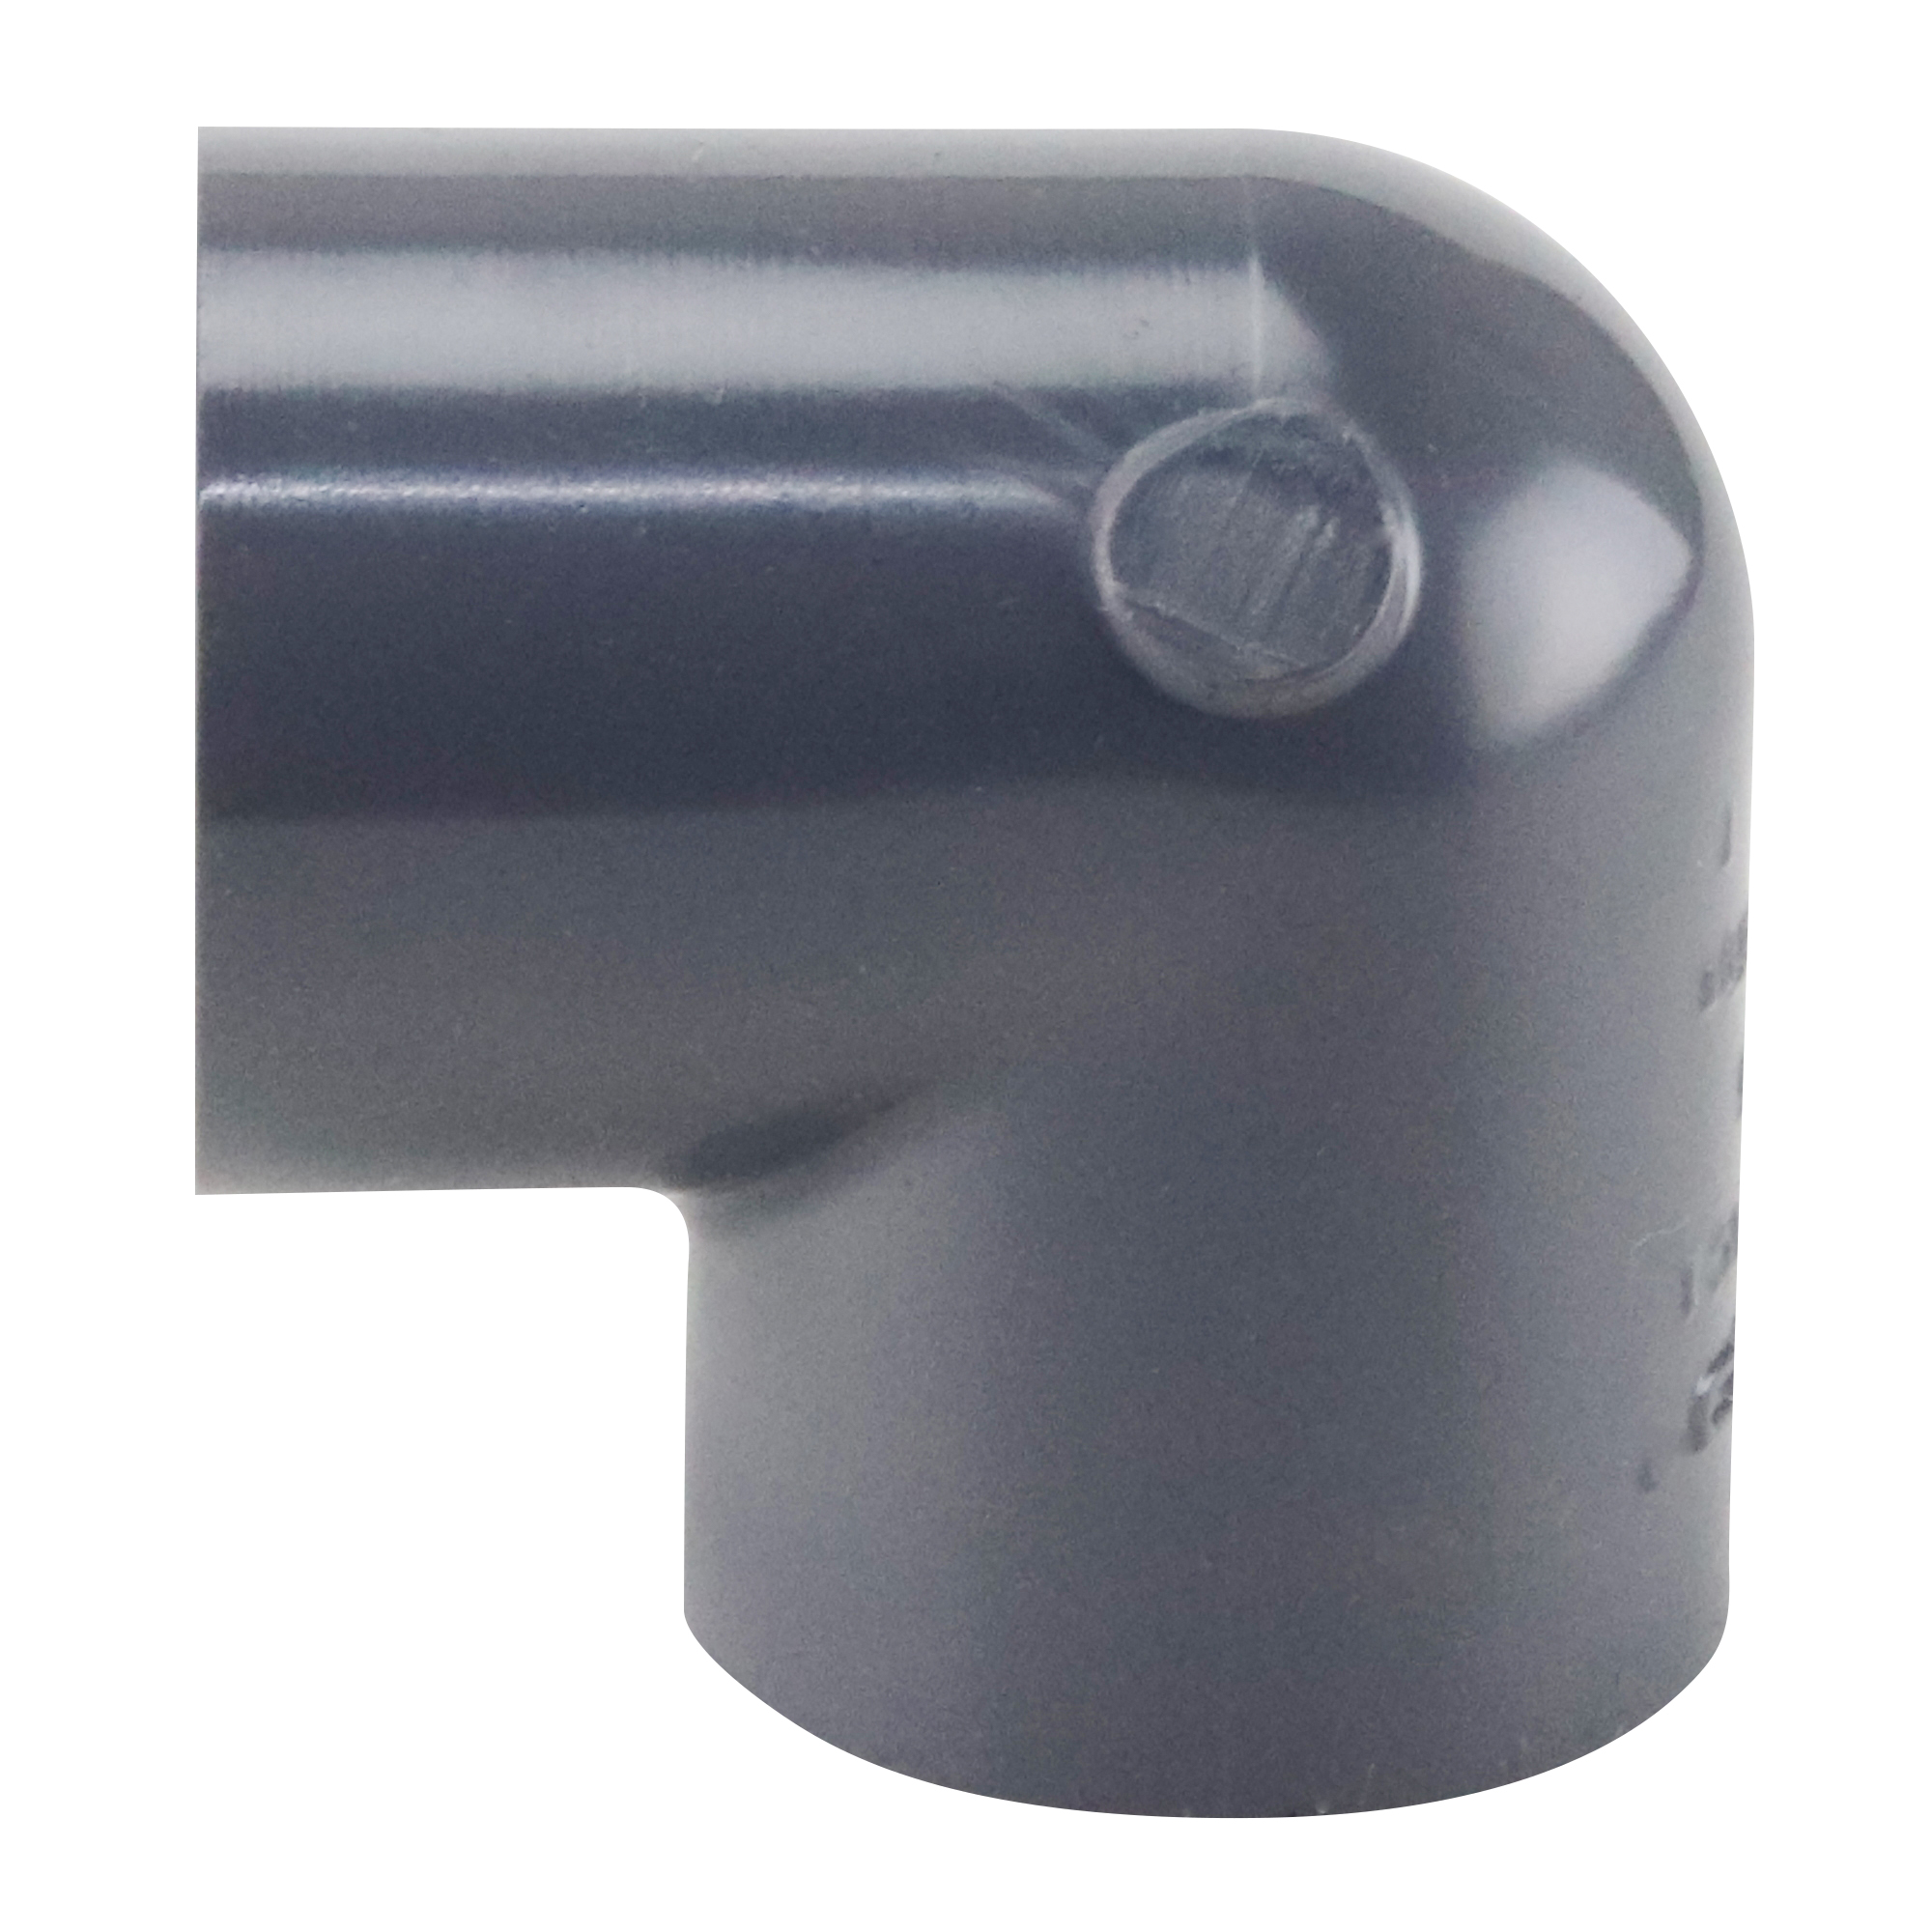 808005BC Pipe Elbow, 1/2 in, FIP, 90 deg Angle, PVC, SCH 80 Schedule